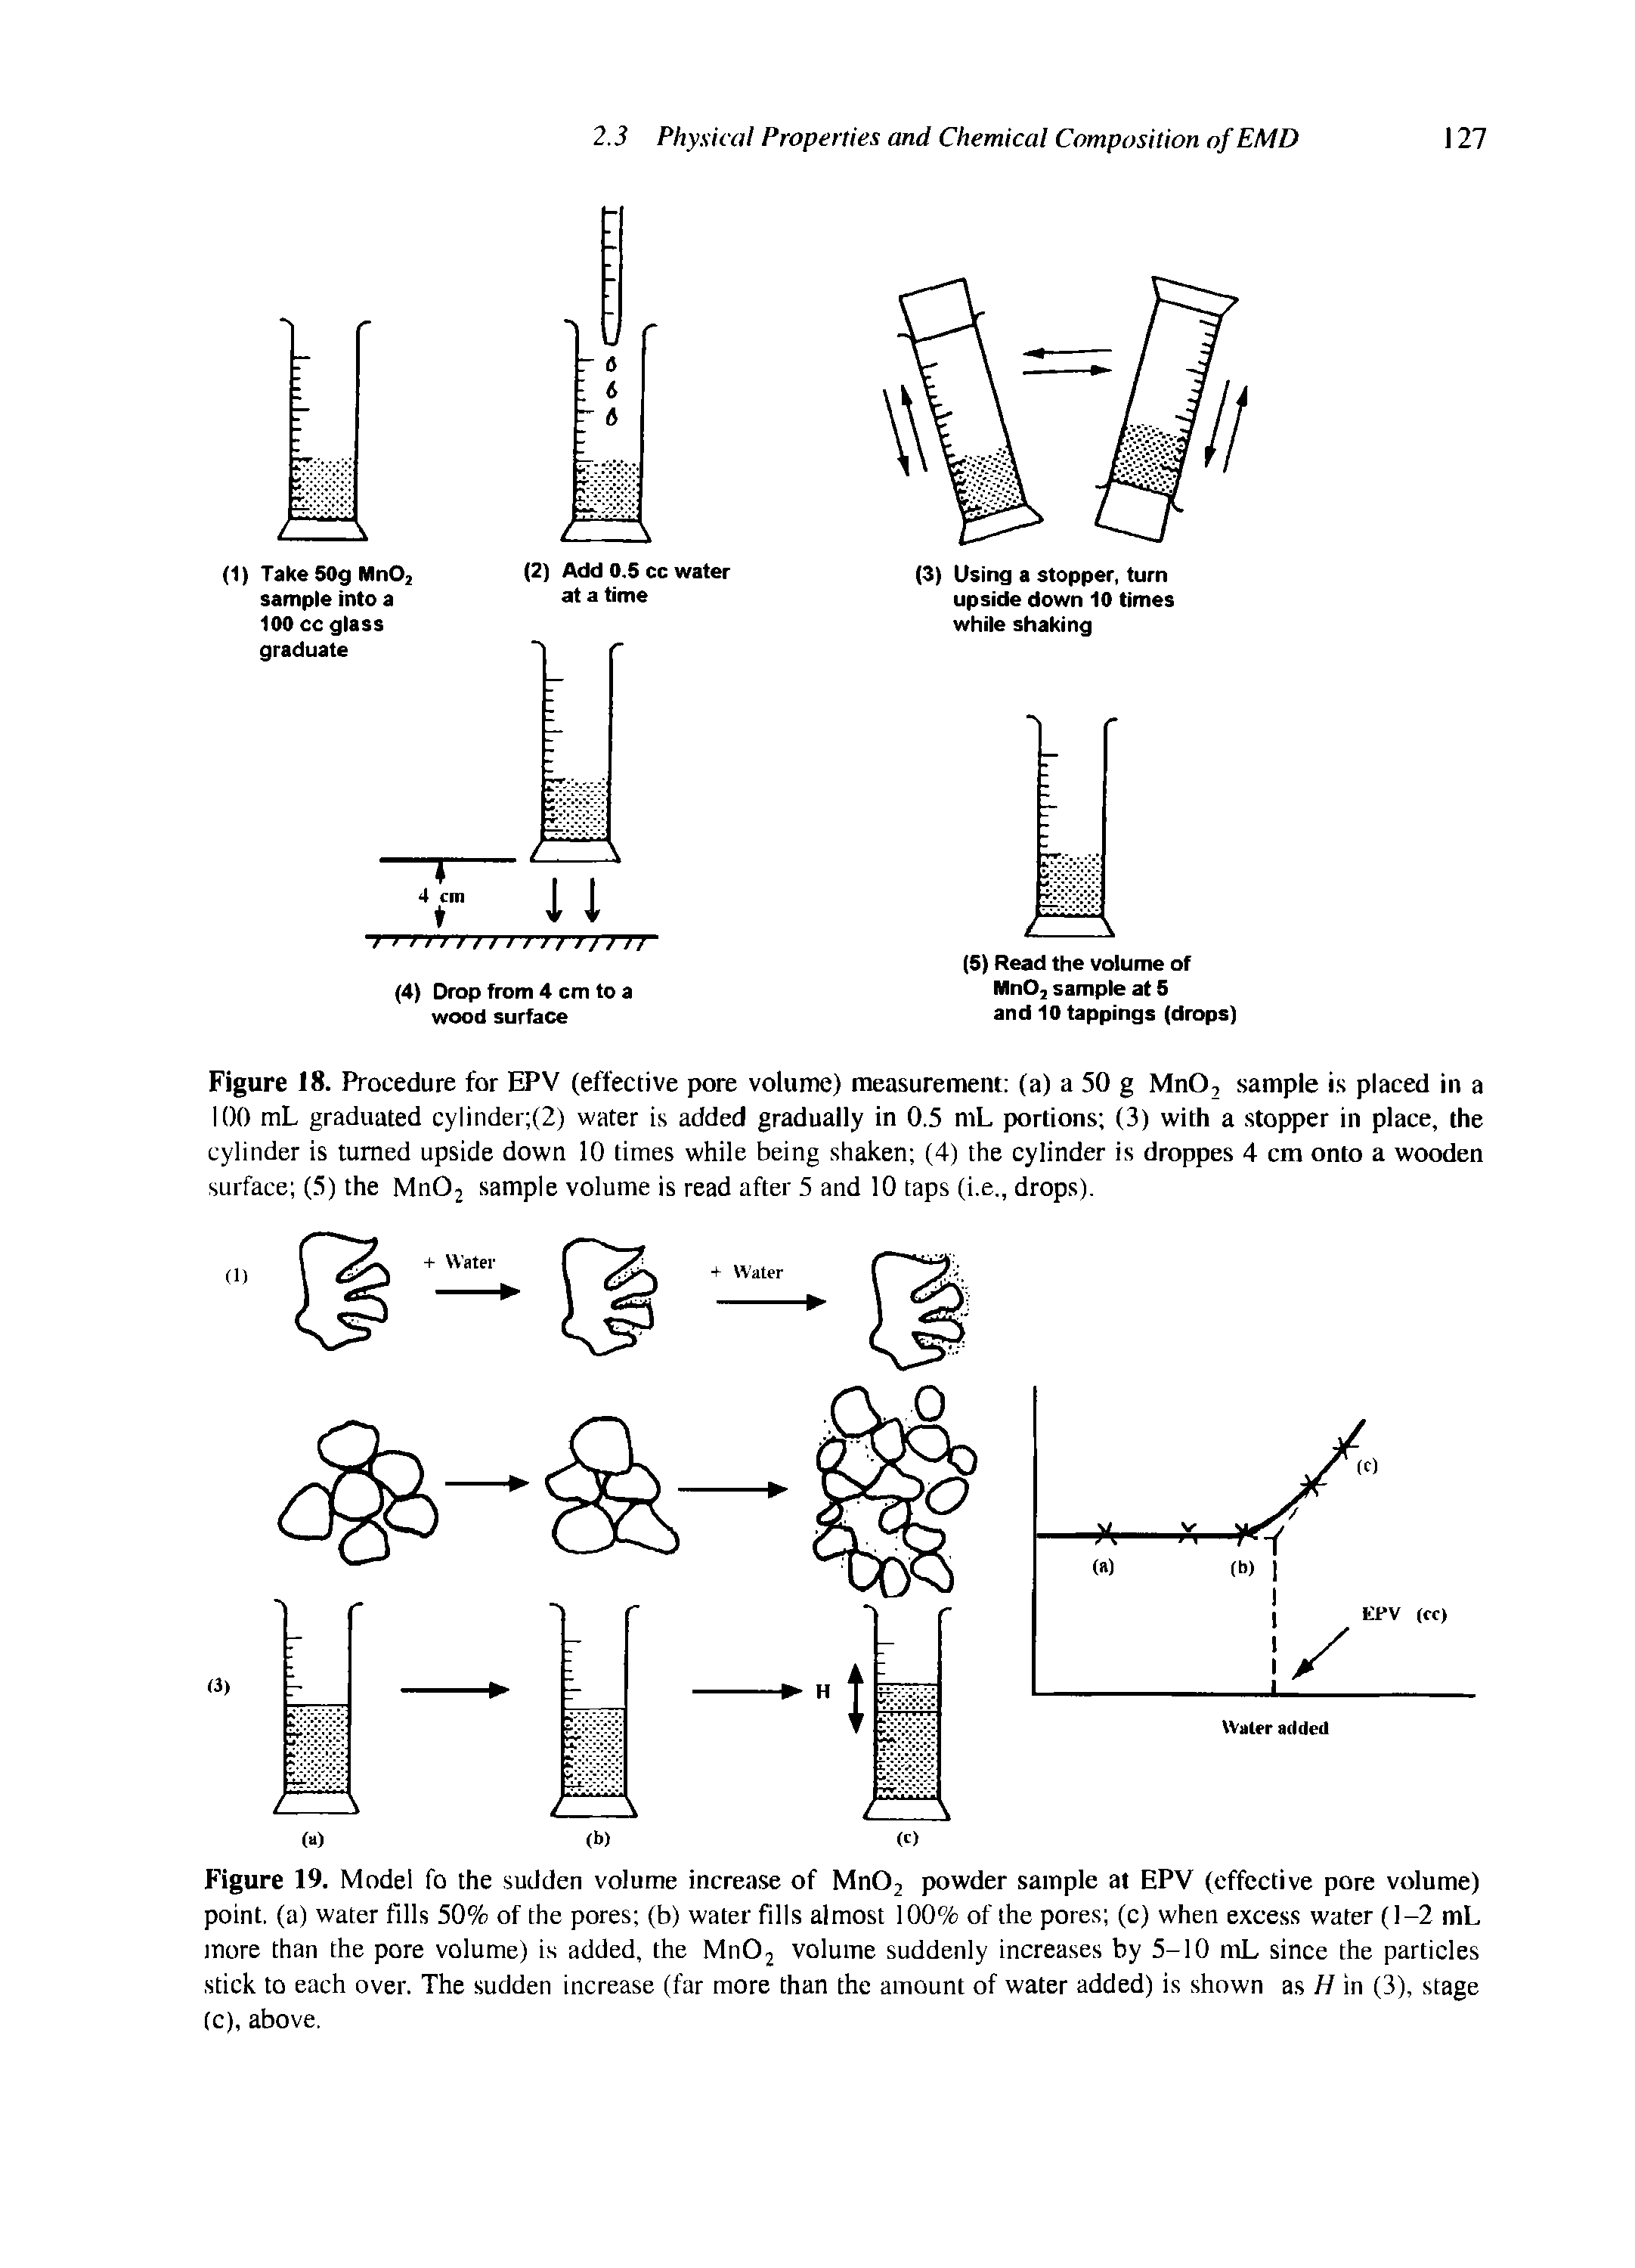 Figure 18. Procedure for EPV (effective pore volume) measurement (a) a 50 g MnO, sample is placed in a 100 mL graduated cylinder (2) water is added gradually in 0.5 mL portions (3) with a stopper in place, the cylinder is turned upside down 10 times while being shaken (4) the cylinder is droppes 4 cm onto a wooden surface (5) the Mn02 sample volume is read after 5 and 10 taps (i.e., drops).